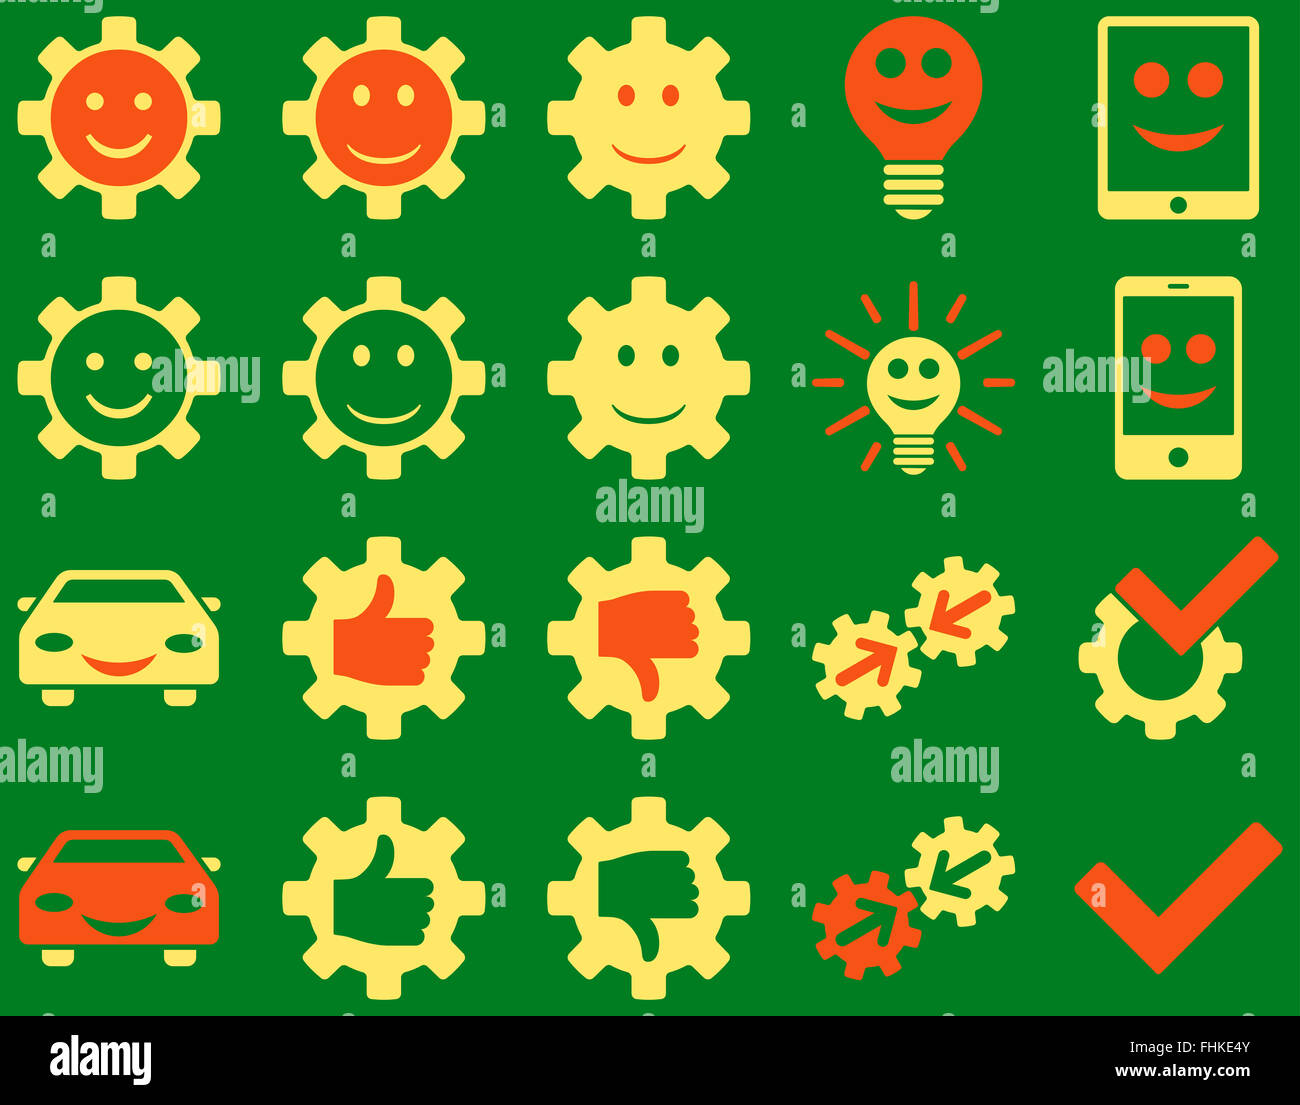 Tools and Smile Gears Icons Stock Photo